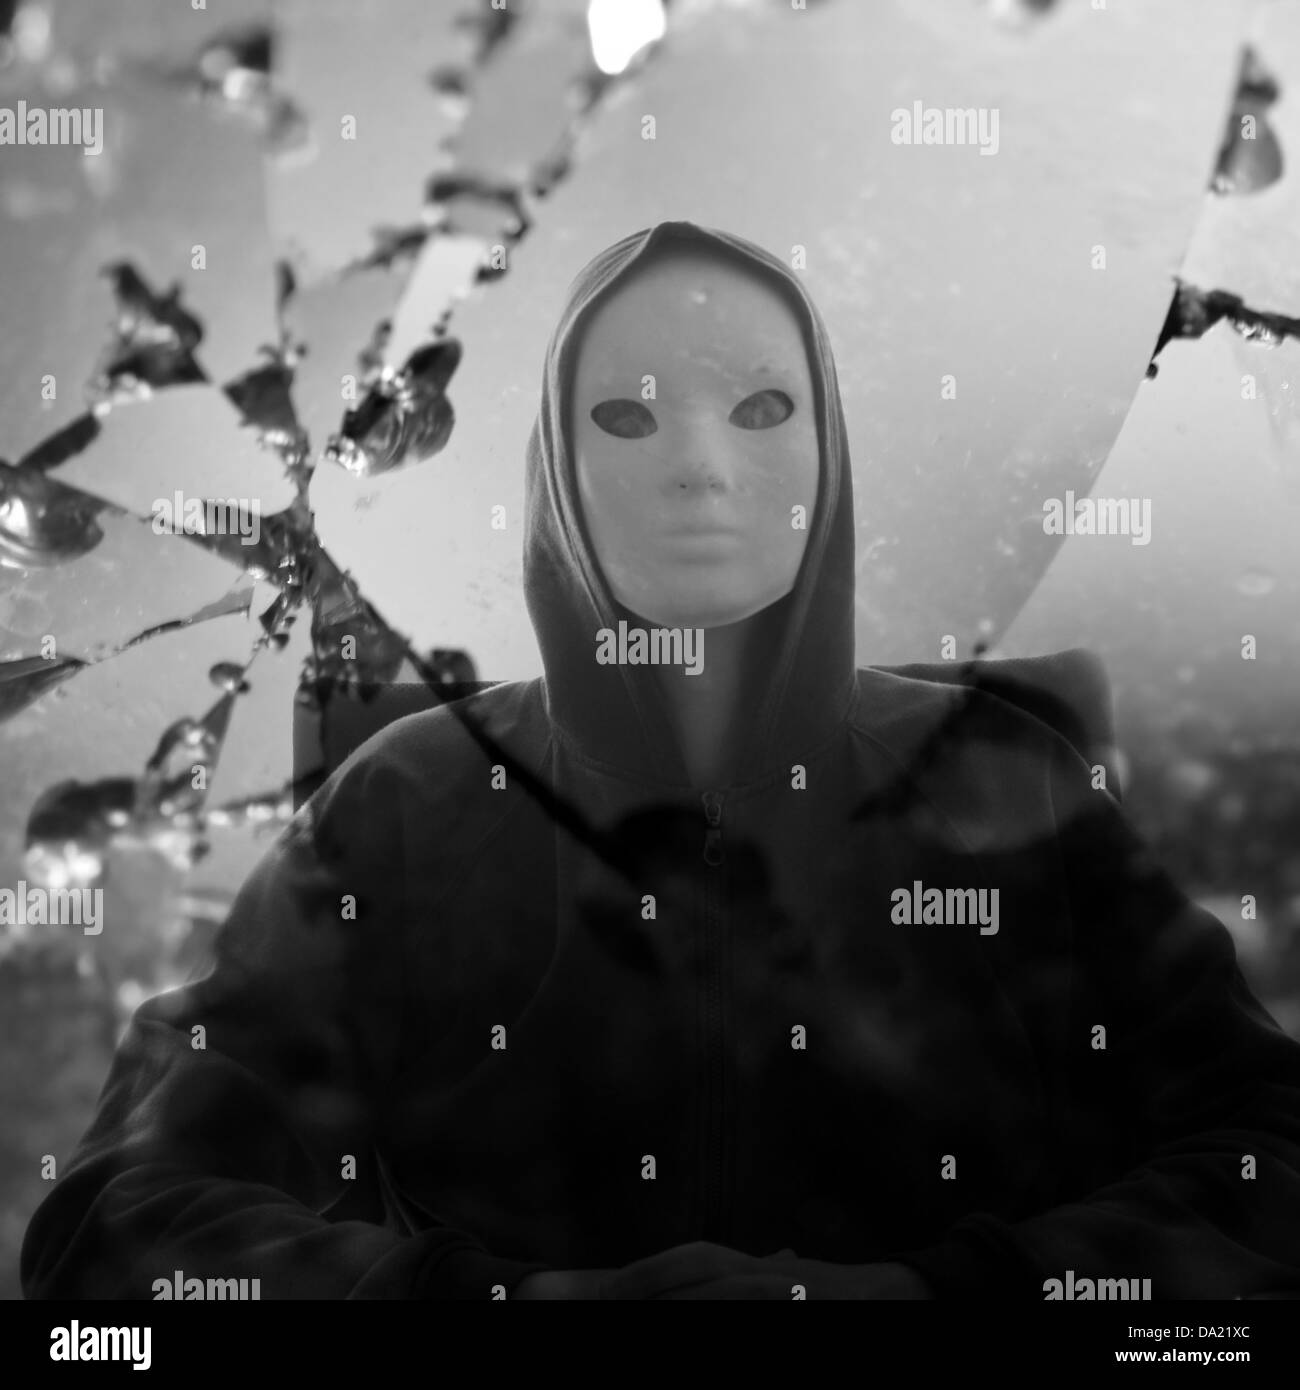 Masked figure reflected through broken glass mirror. Black and white. Stock Photo